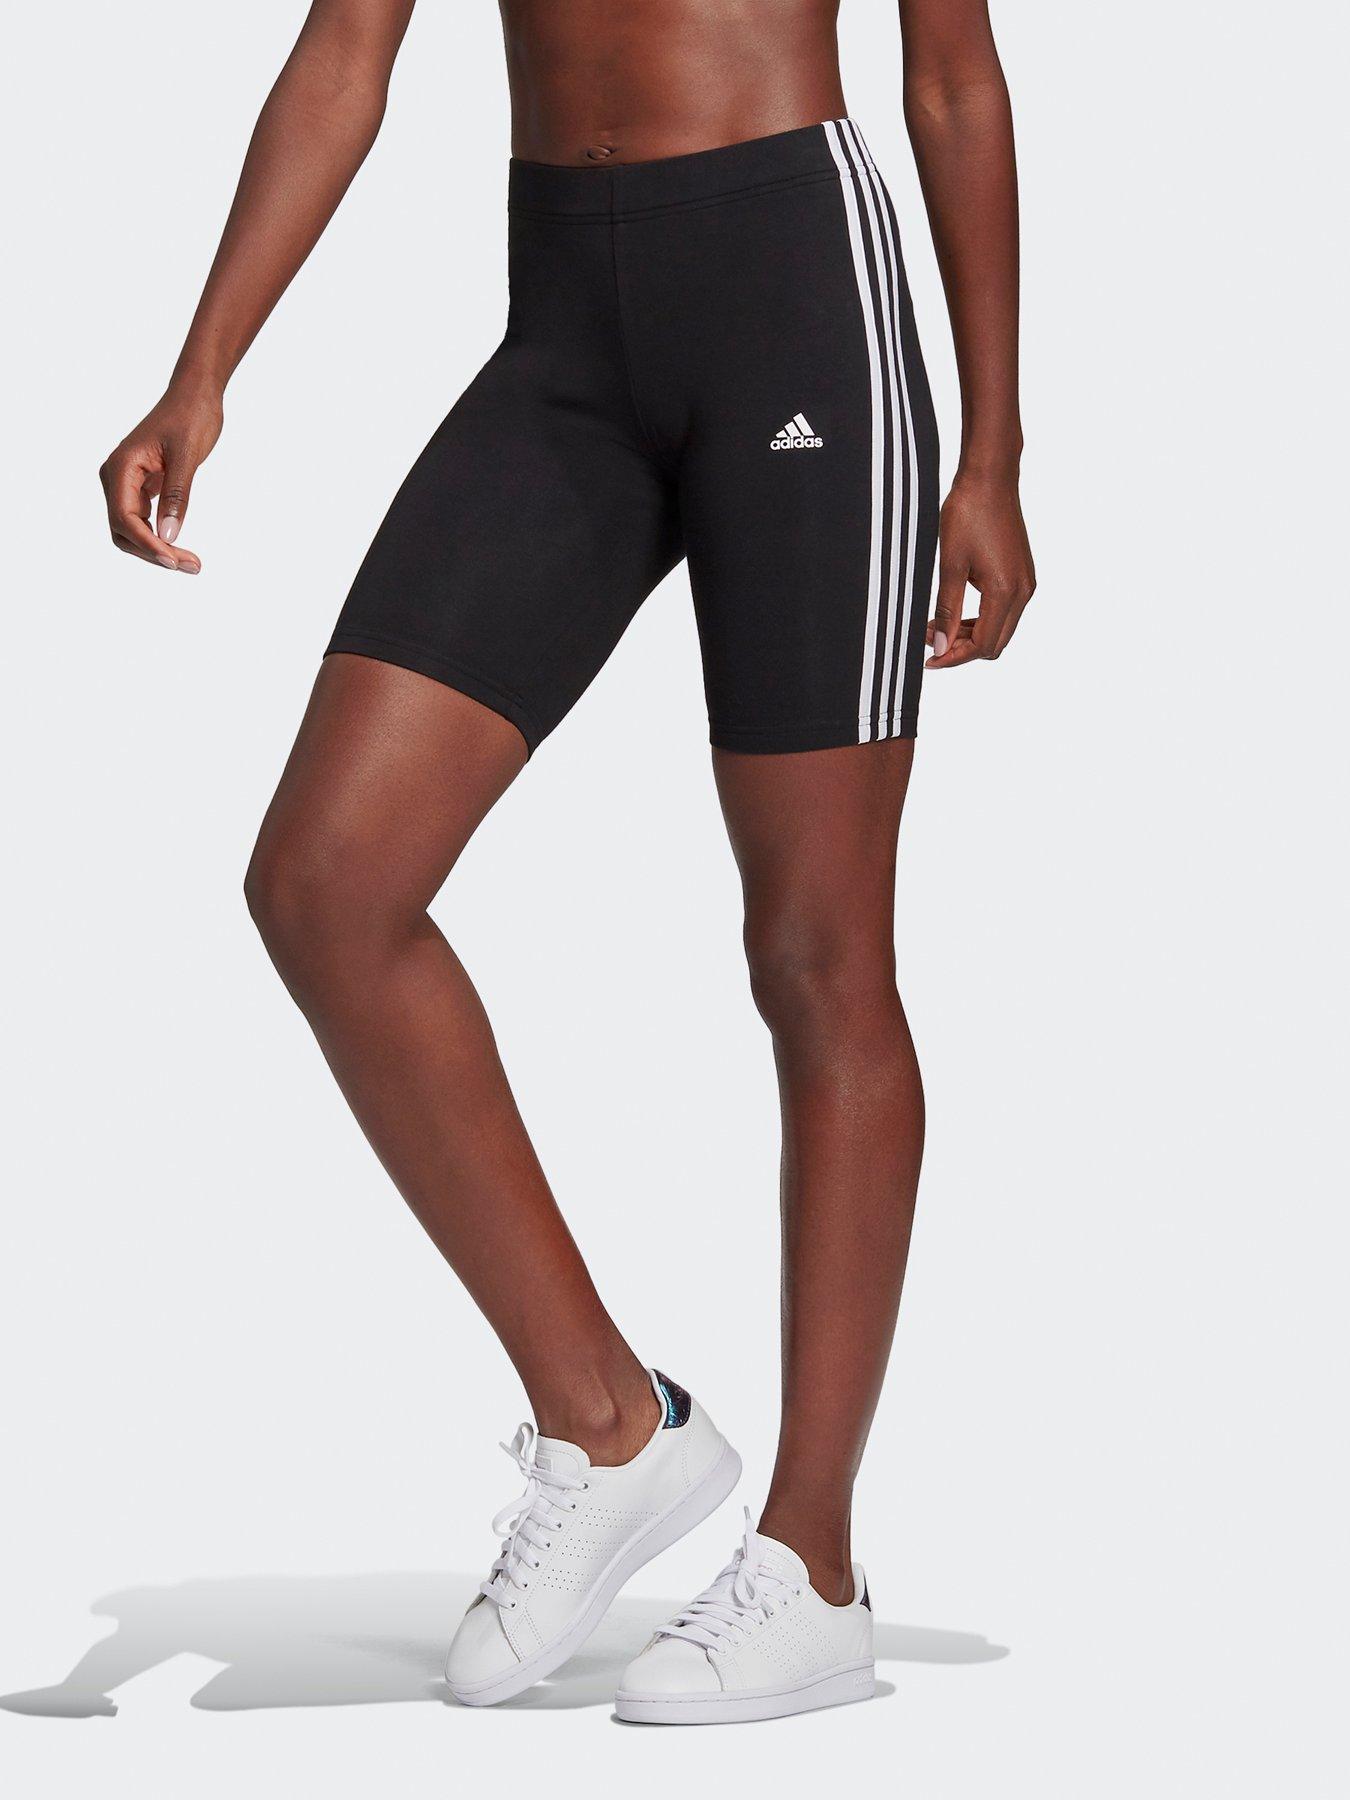 Cycling | Adidas | Shorts | Womens clothing Sports leisure | www.very.co.uk